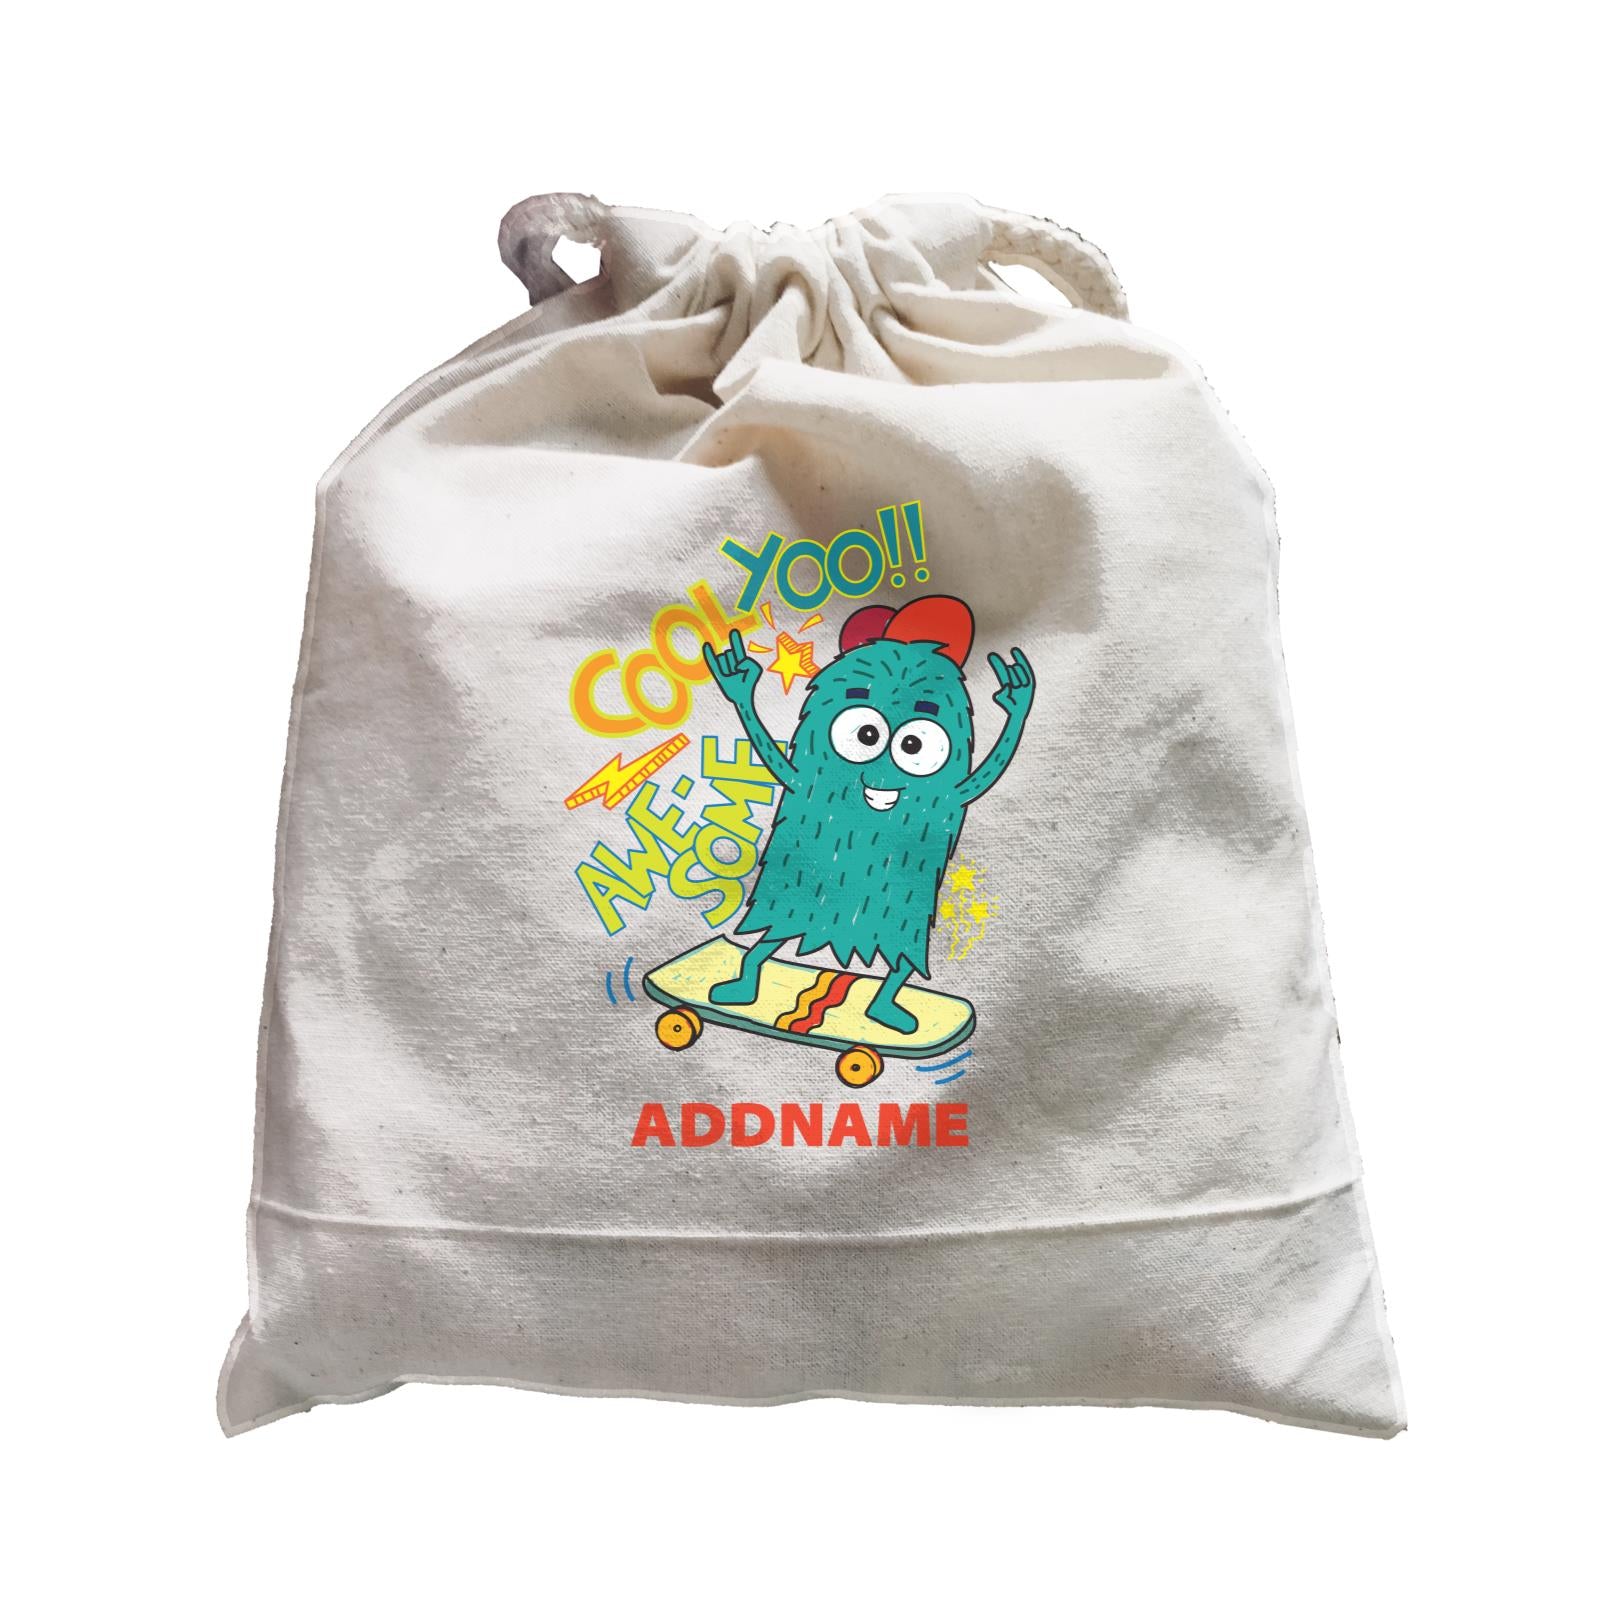 Cool Cute Monster Cool Yoo Awesome Skateboard Monster Addname Satchel